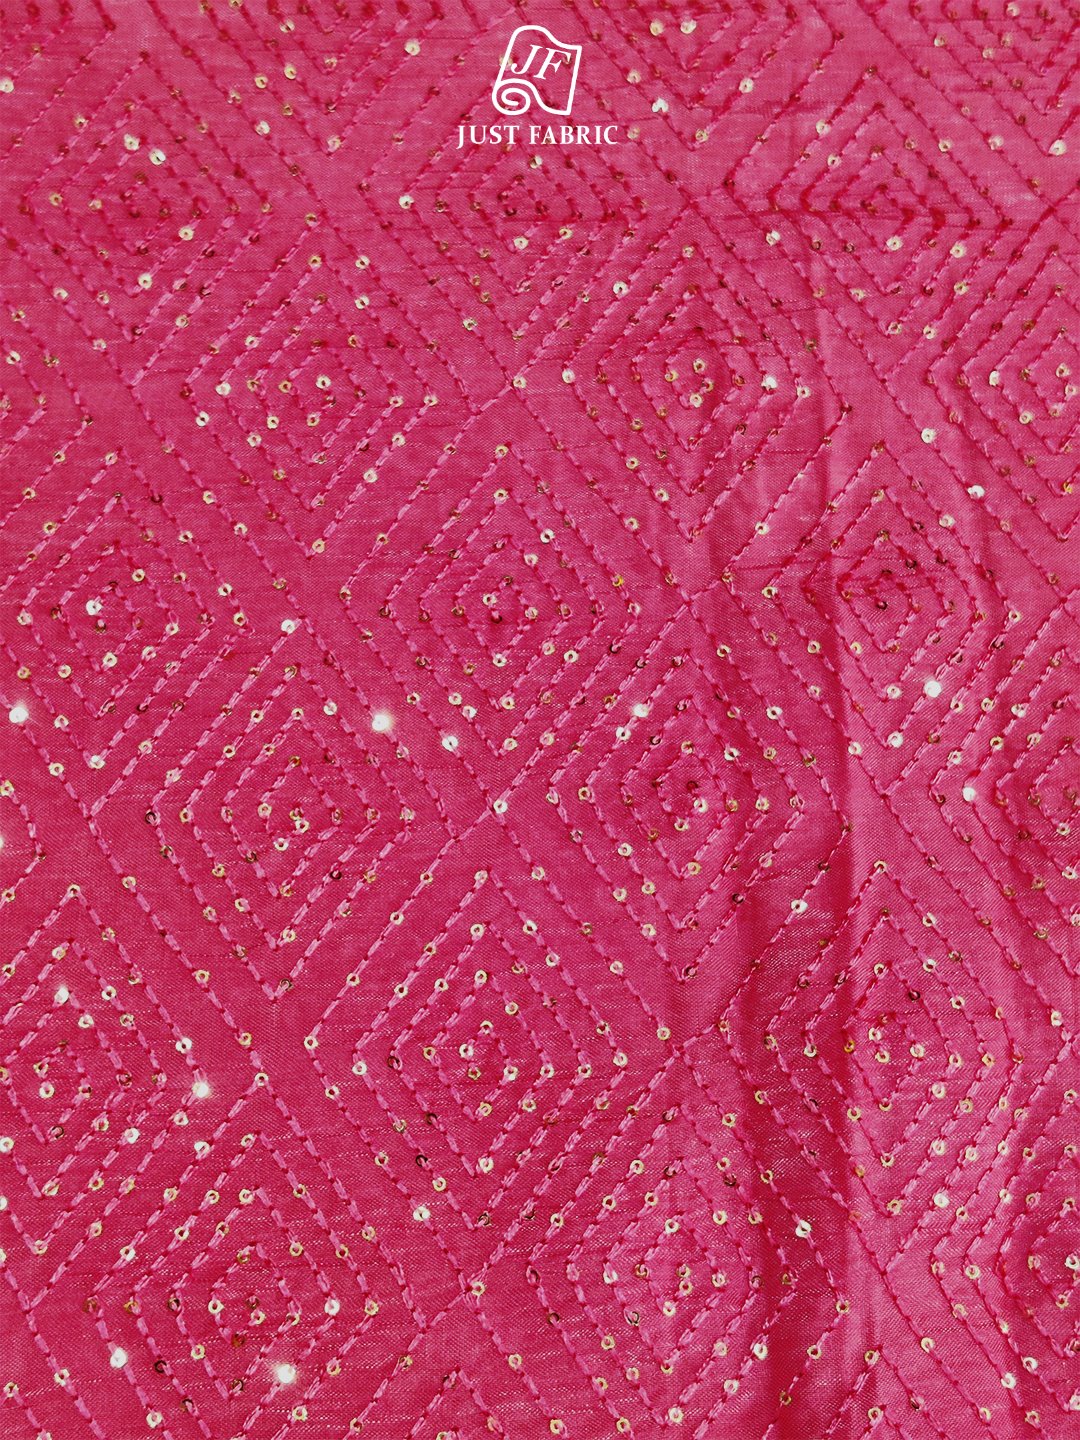 Thread & Sequins work of Diamond Jaal Allover on Upada Silk Fabric With Embroidery ( 44" Inch Width) JUST FABRIC